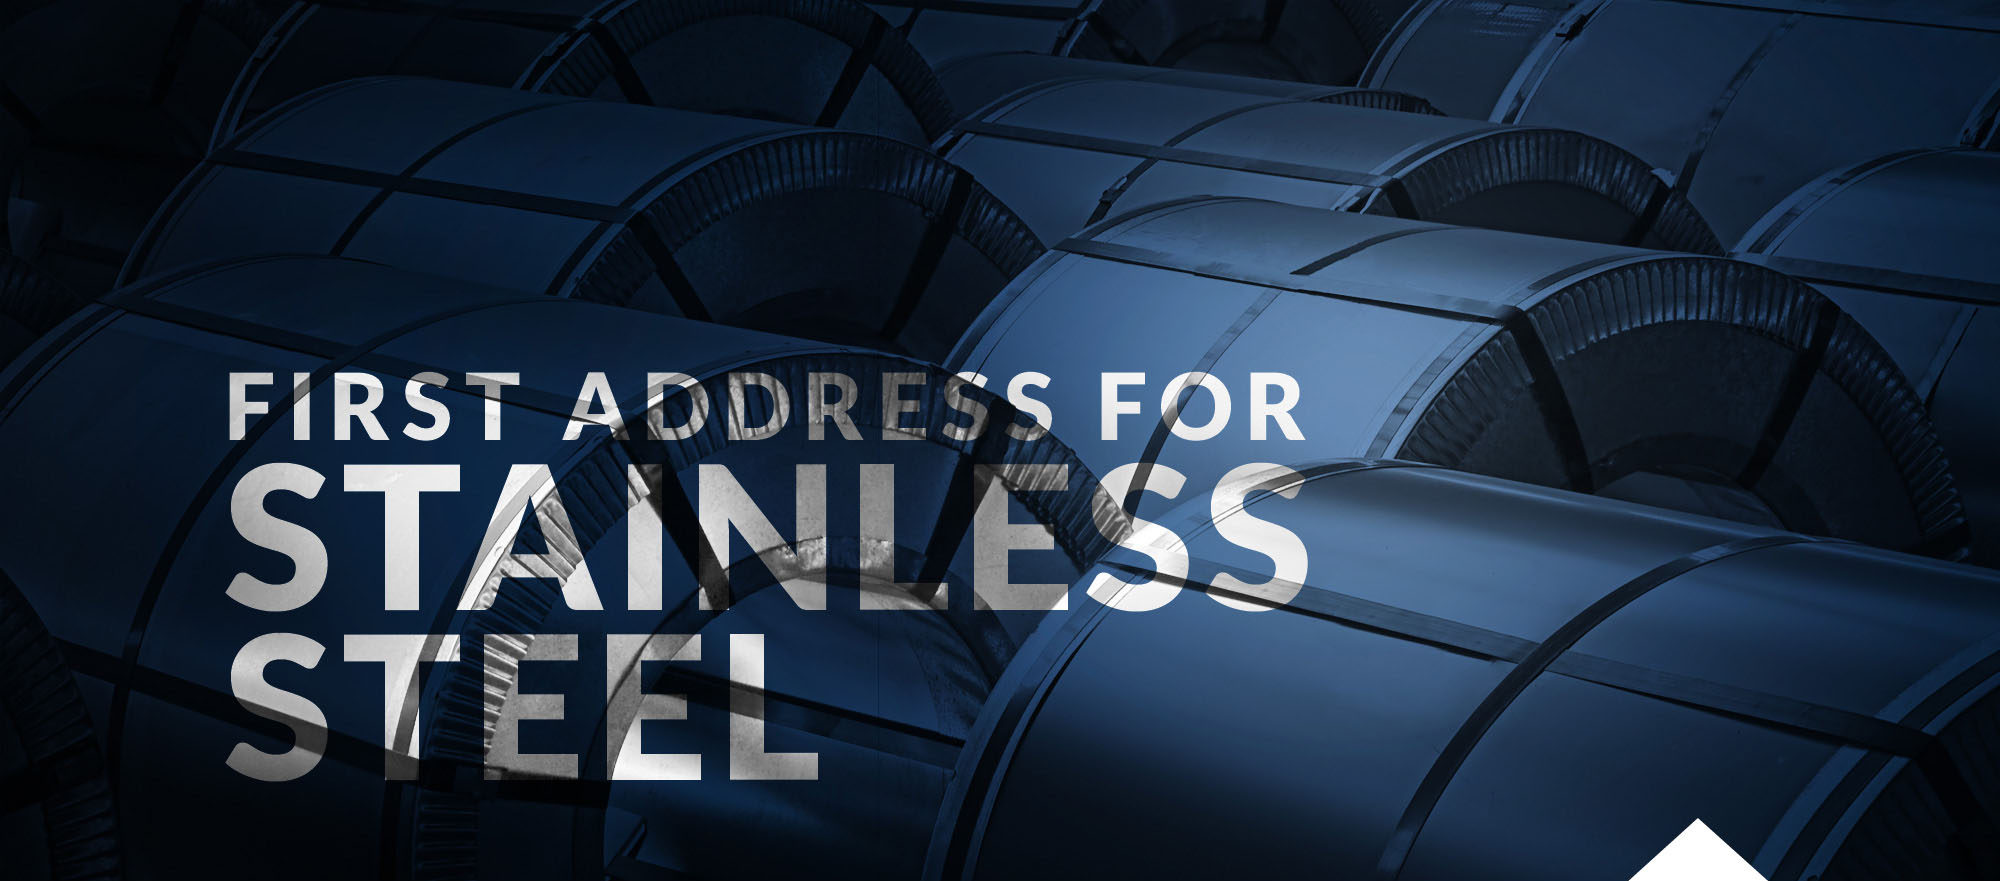 First address for stainless steel